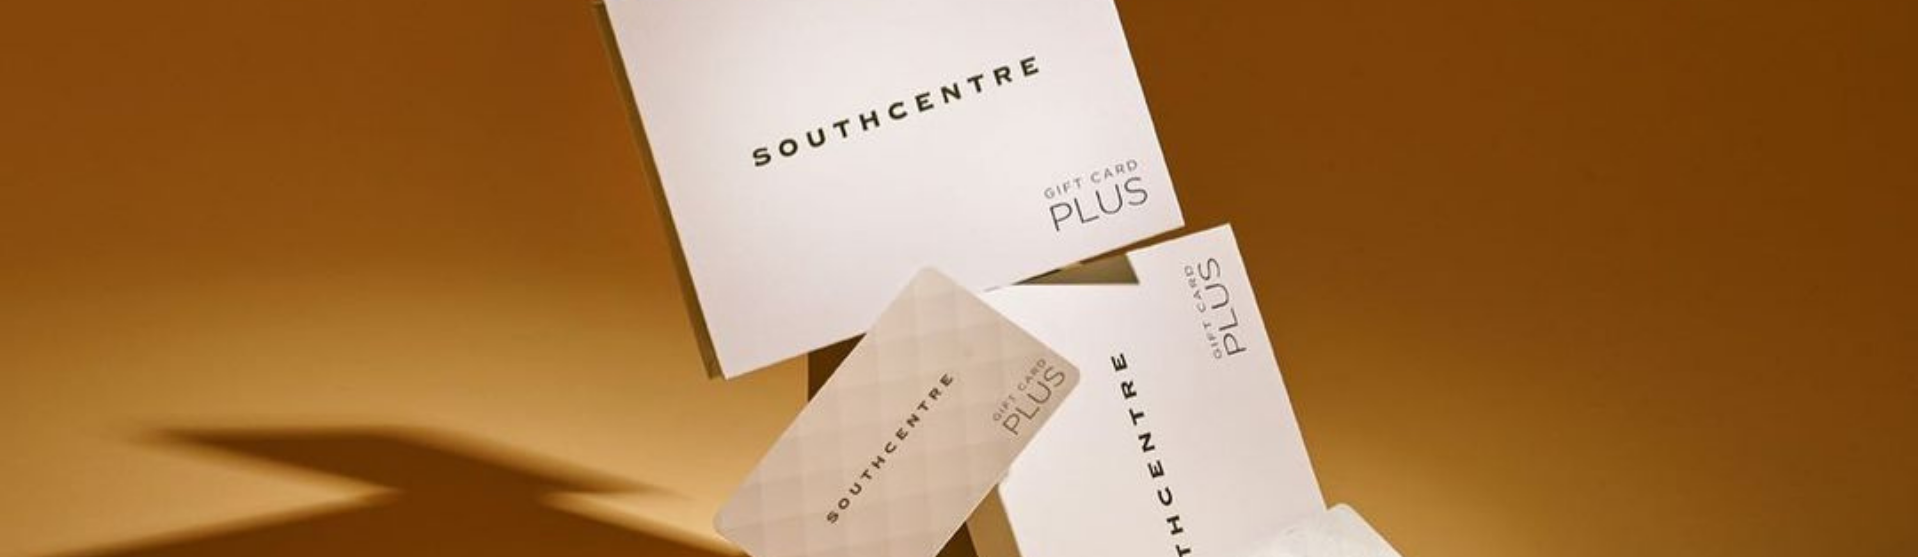 Stack of Southcentre gift cards